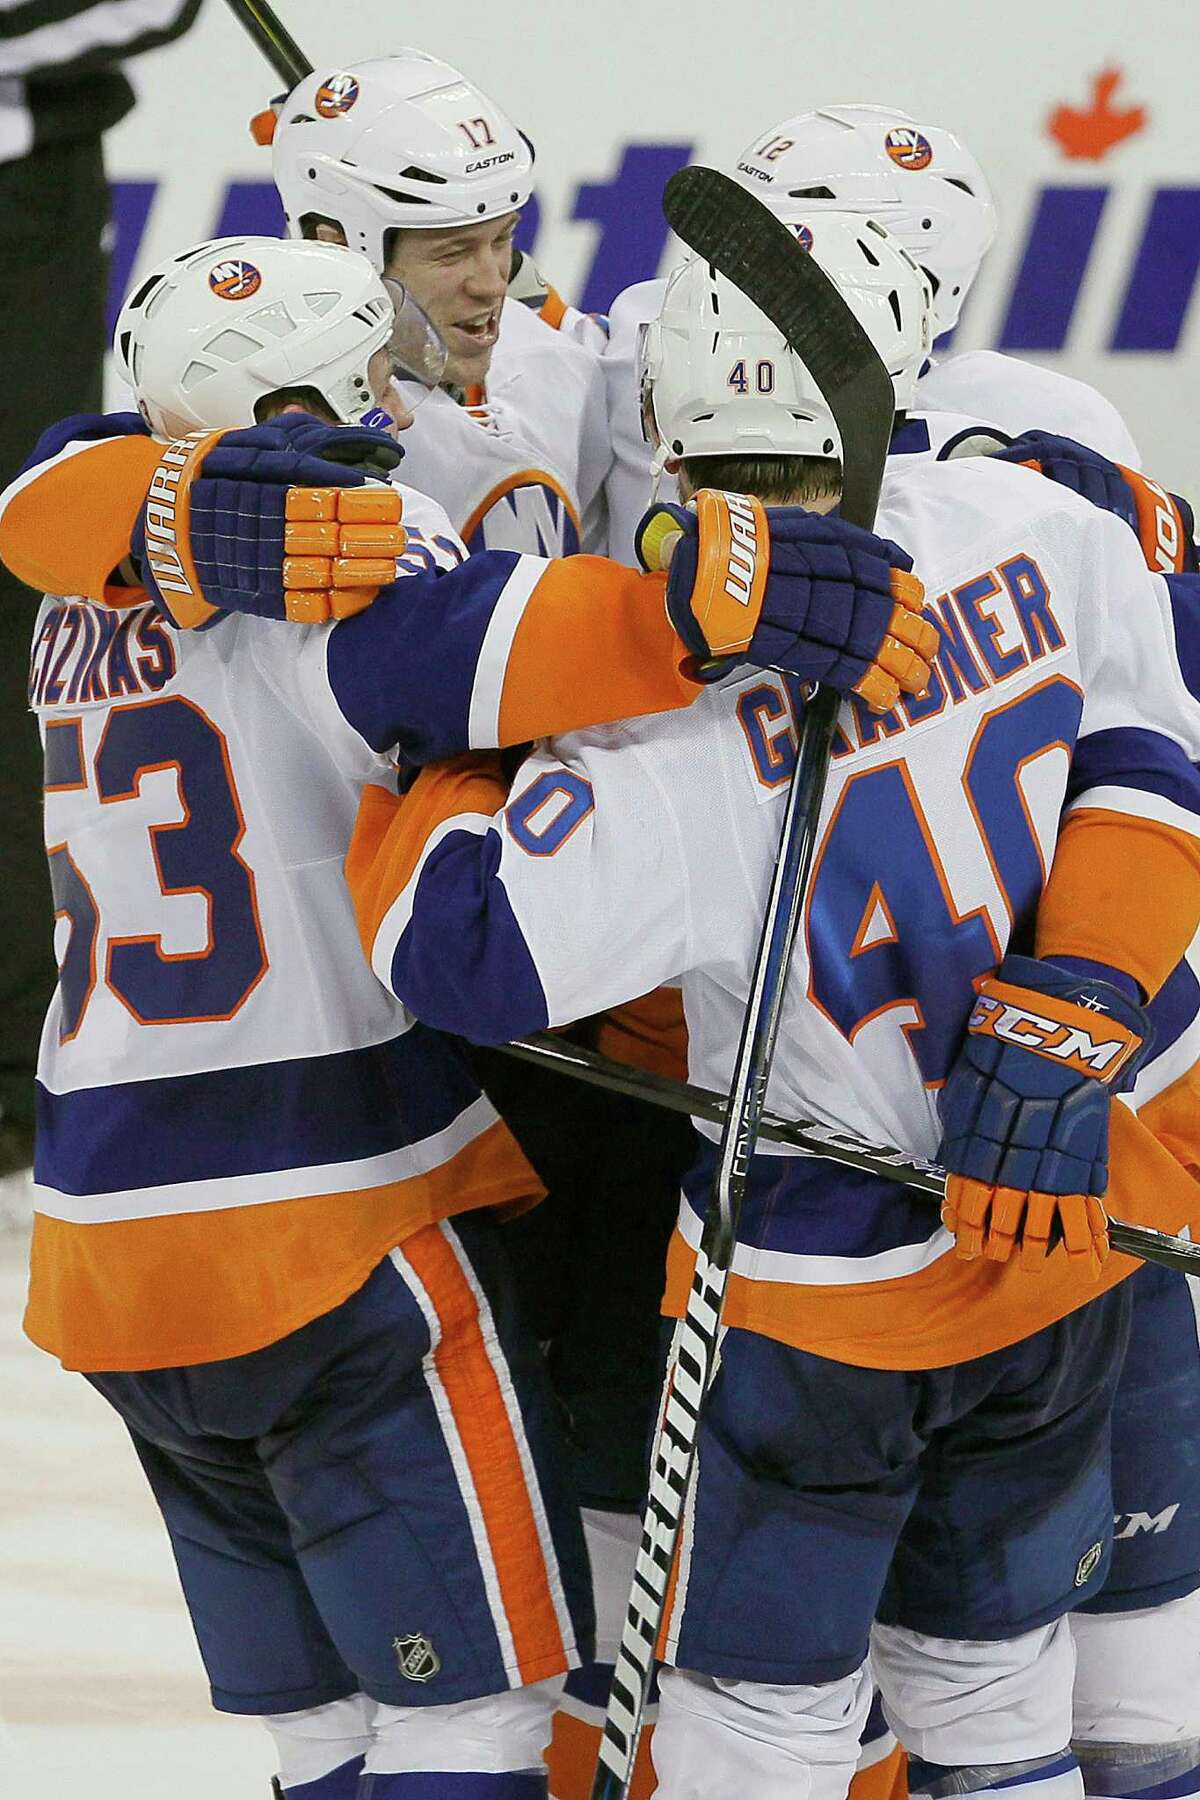 New York Islanders' Casey Cizikas (53), Matt Martin (17), Josh Bailey (12) and Michael Grabner (40) celebrate a shootout win over the Winnipeg Jets in an NHL hockey game in Winnipeg, Manitoba, Saturday, April 20, 2013. Cizikas played part of the season with the Sound Tigers. (AP Photo/The Canadian Press, John Woods)